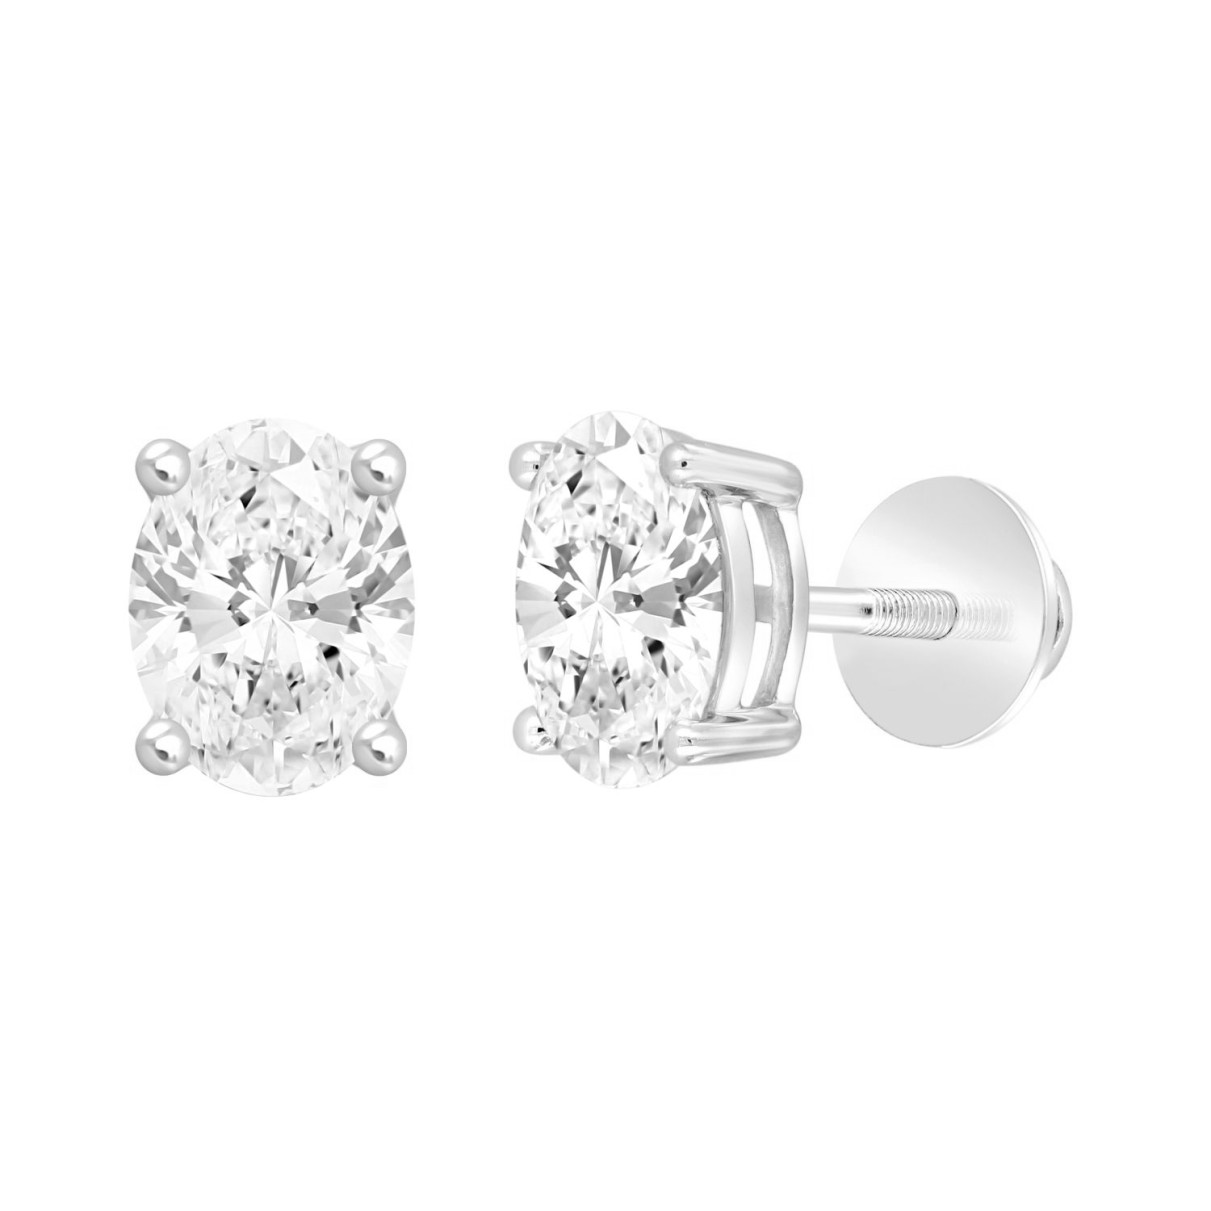 LADIES SOLITAIRE EARRINGS  3CT OVAL DIAMOND 14K WHITE GOLD (CENTER STONE OVAL DIAMOND 1 1/2CT )